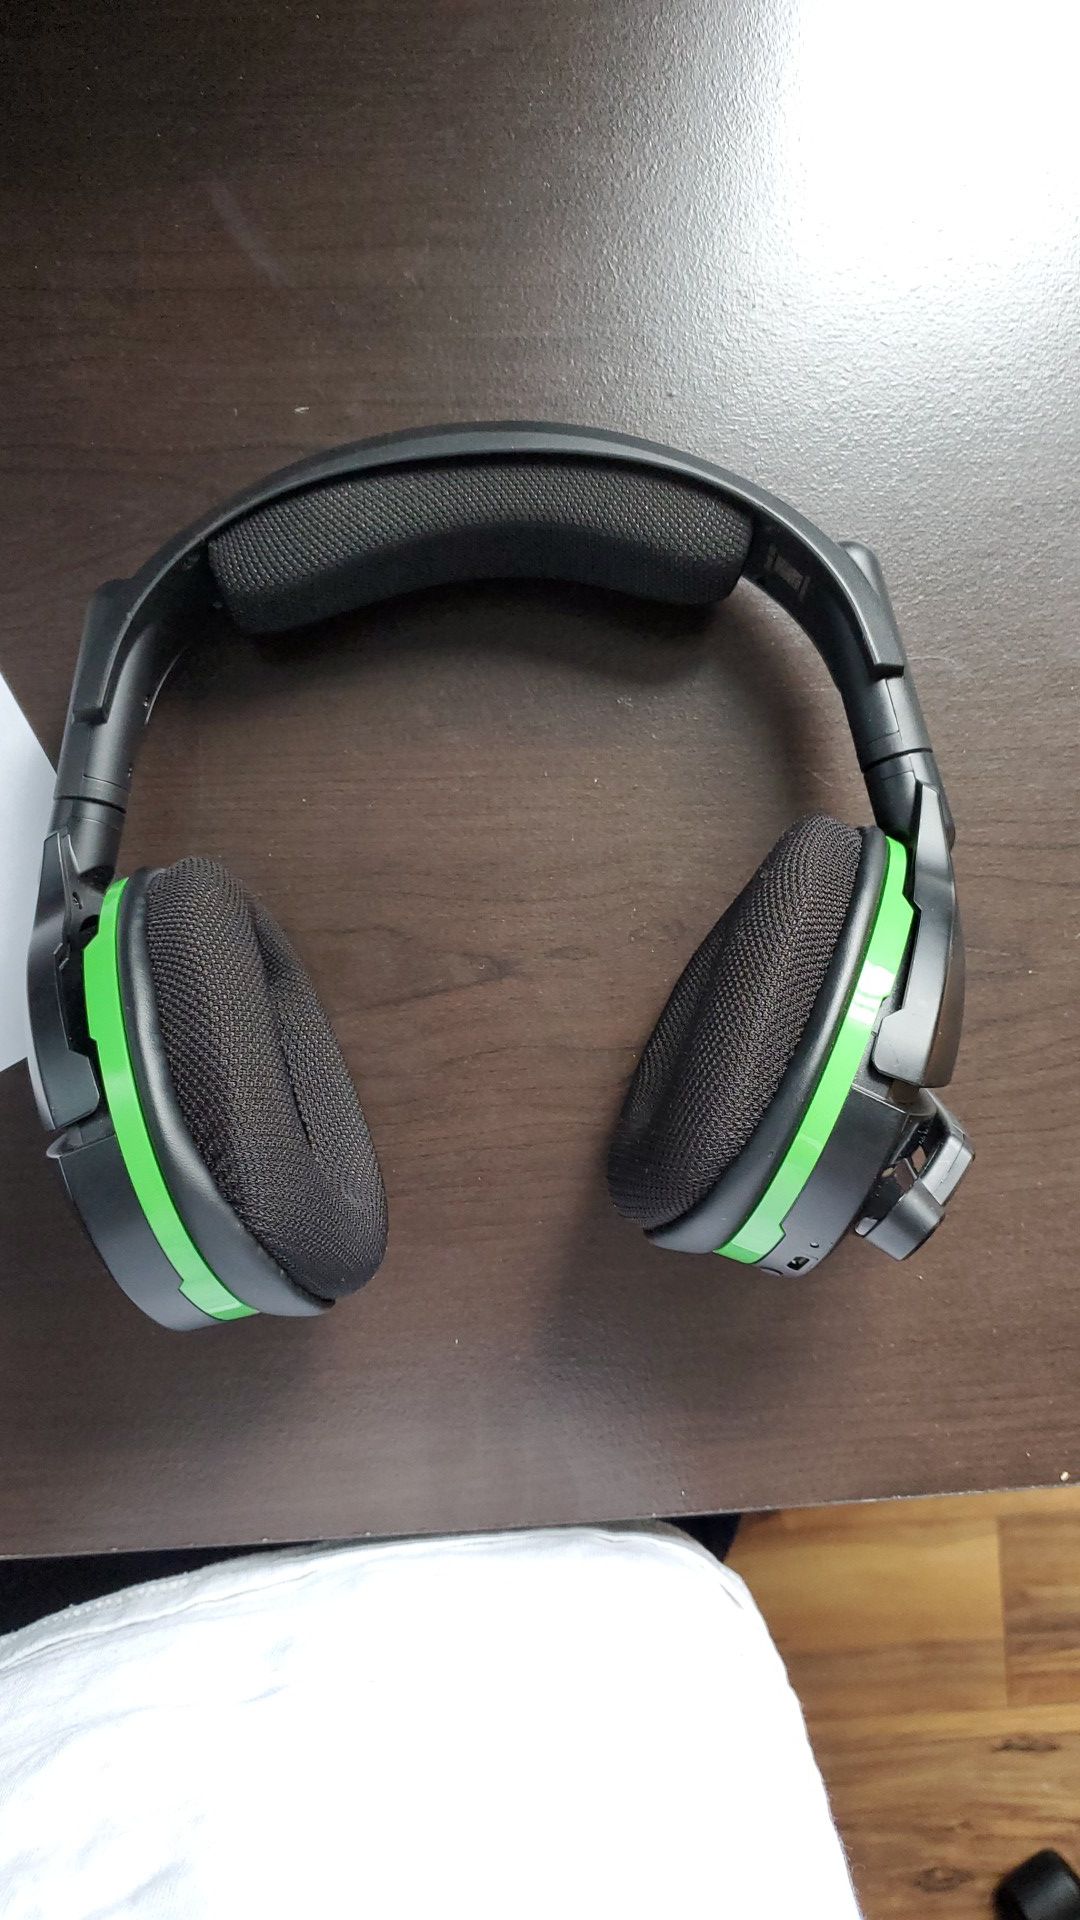 Chargeable Turtle Beach Gaming Headphones with Mic